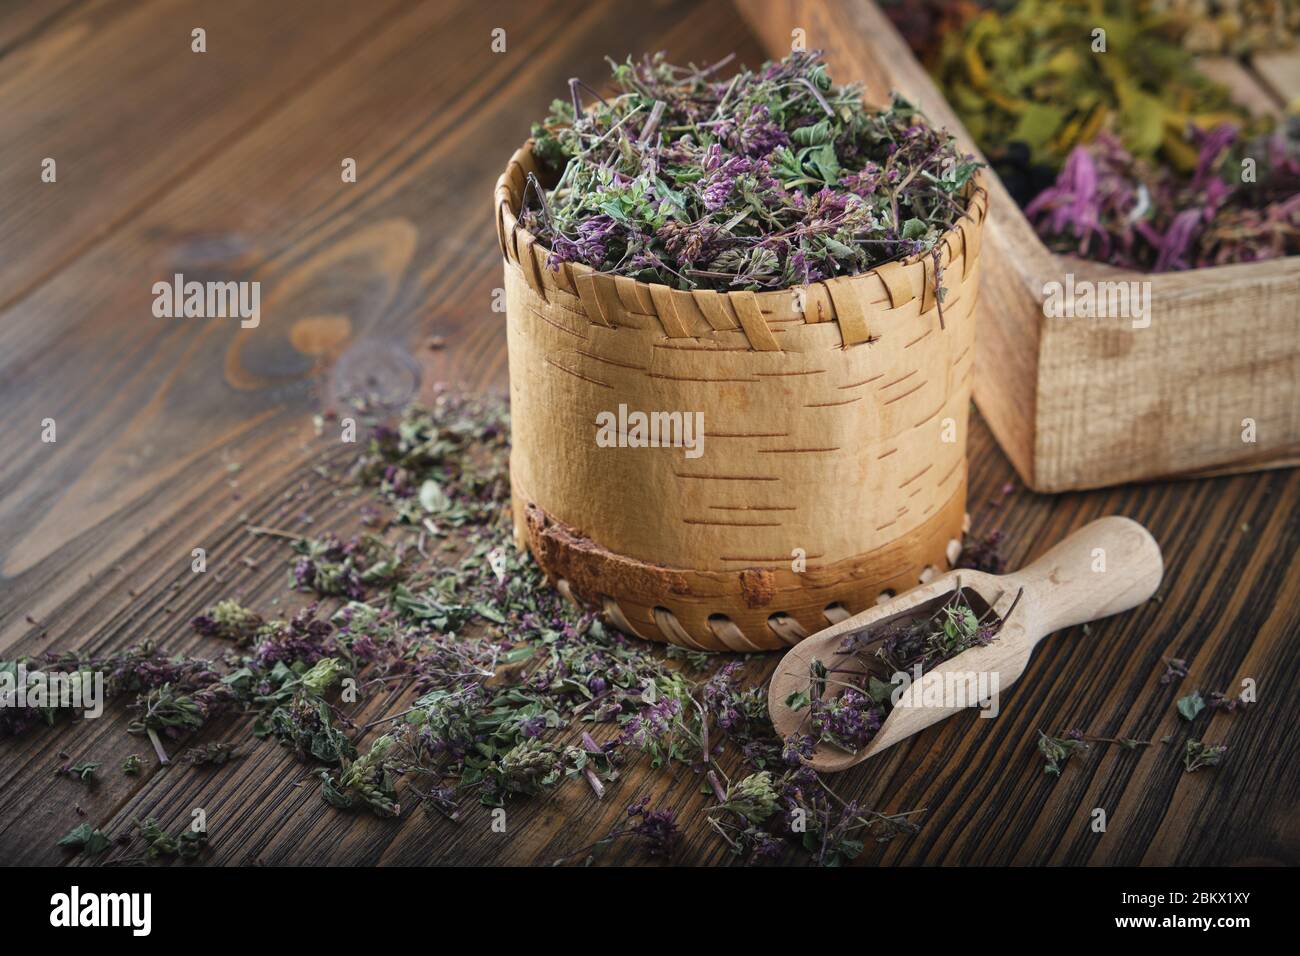 Wooden bowl of dry wild Marjoram or Origanum vulgare plants, wooden crate of medicinal herbs on background. Stock Photo